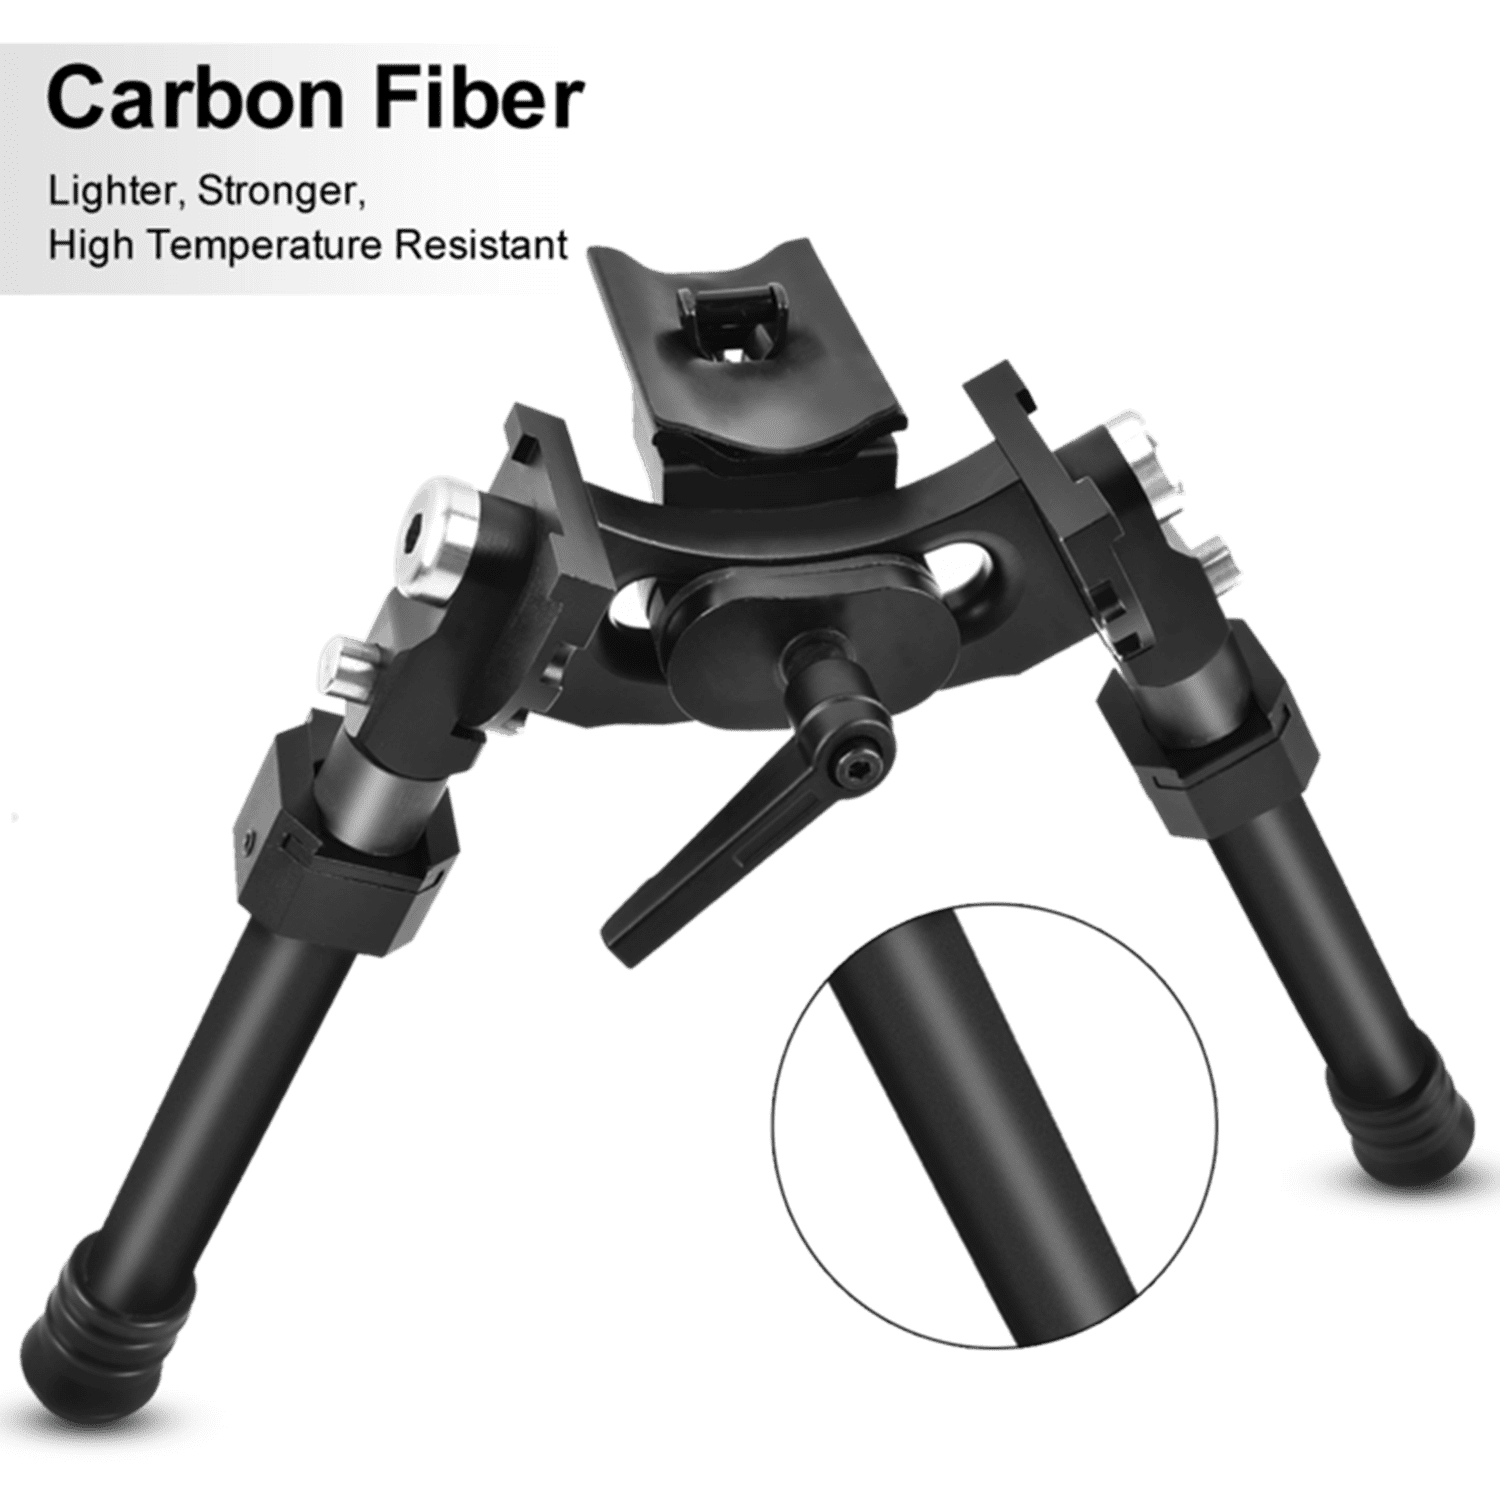 Details about   Carbon Fiber 6" for Hunting & Shooting 9" Rifle Bipod with Picatinny Adapter